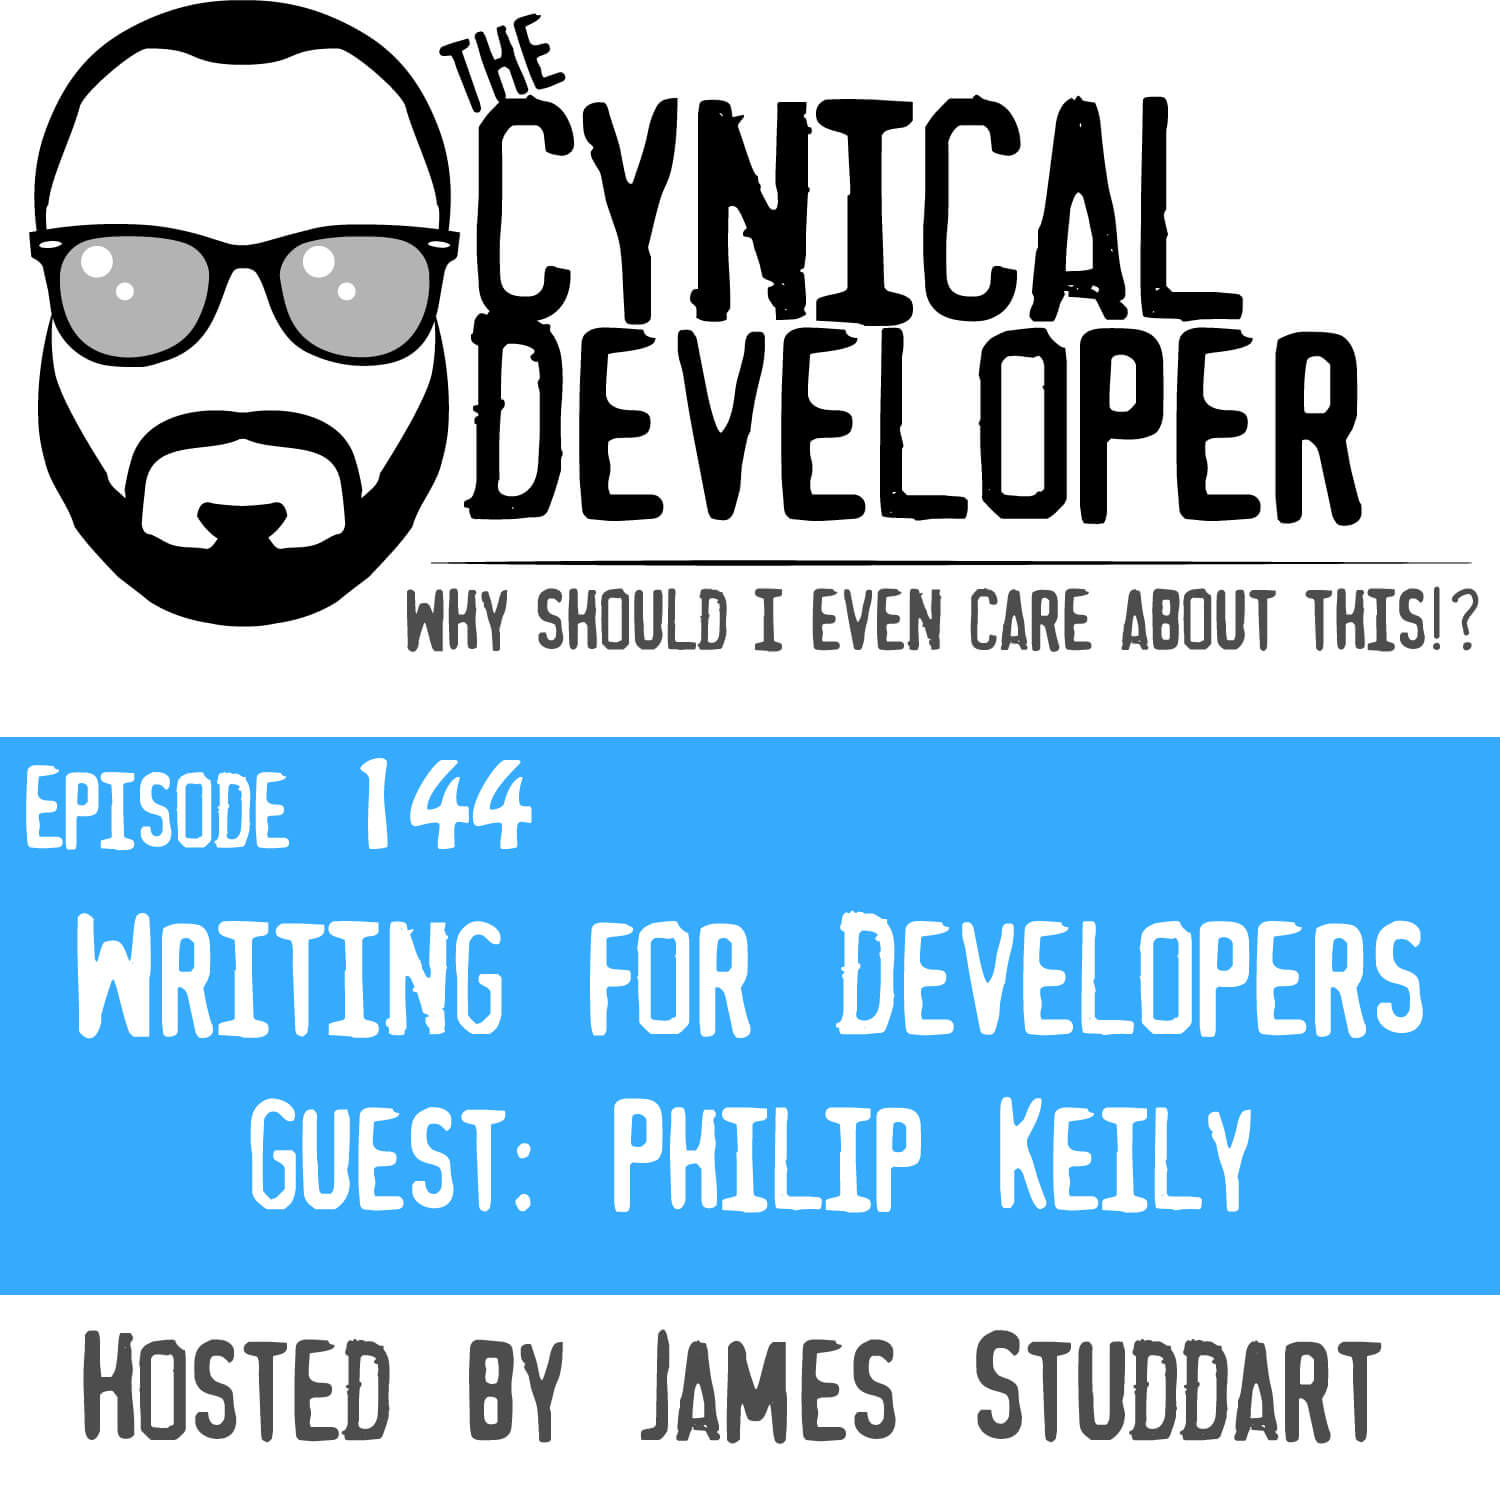 Episode 144 - Writing for Developers